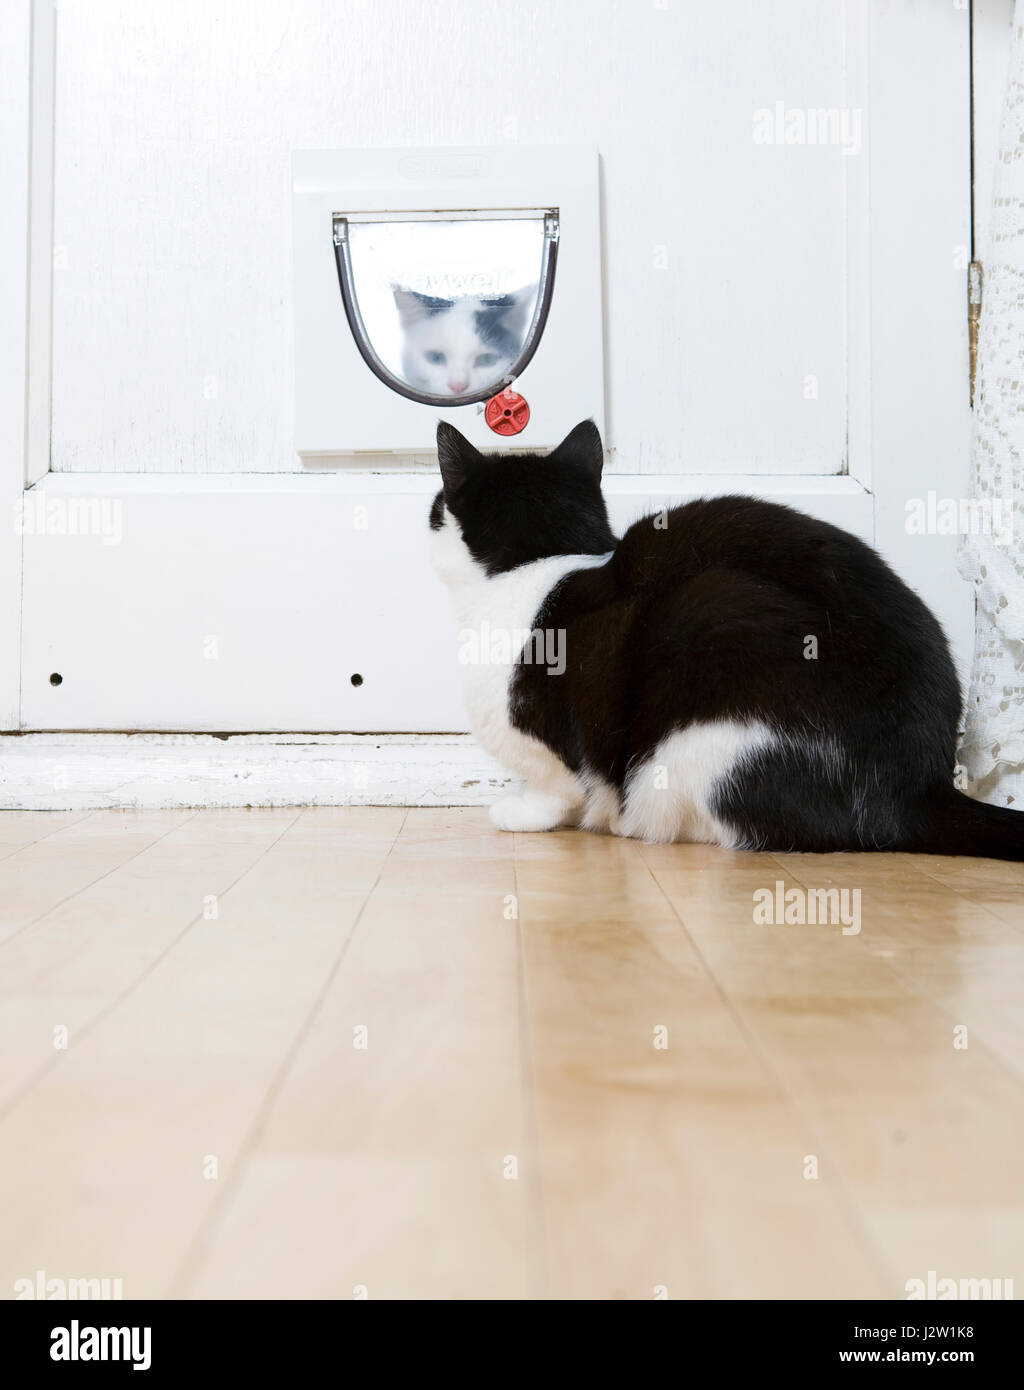 Black and white cat (Felis catus) indoors looking at another cat trying to get in through the cat flap from the outside Stock Photo